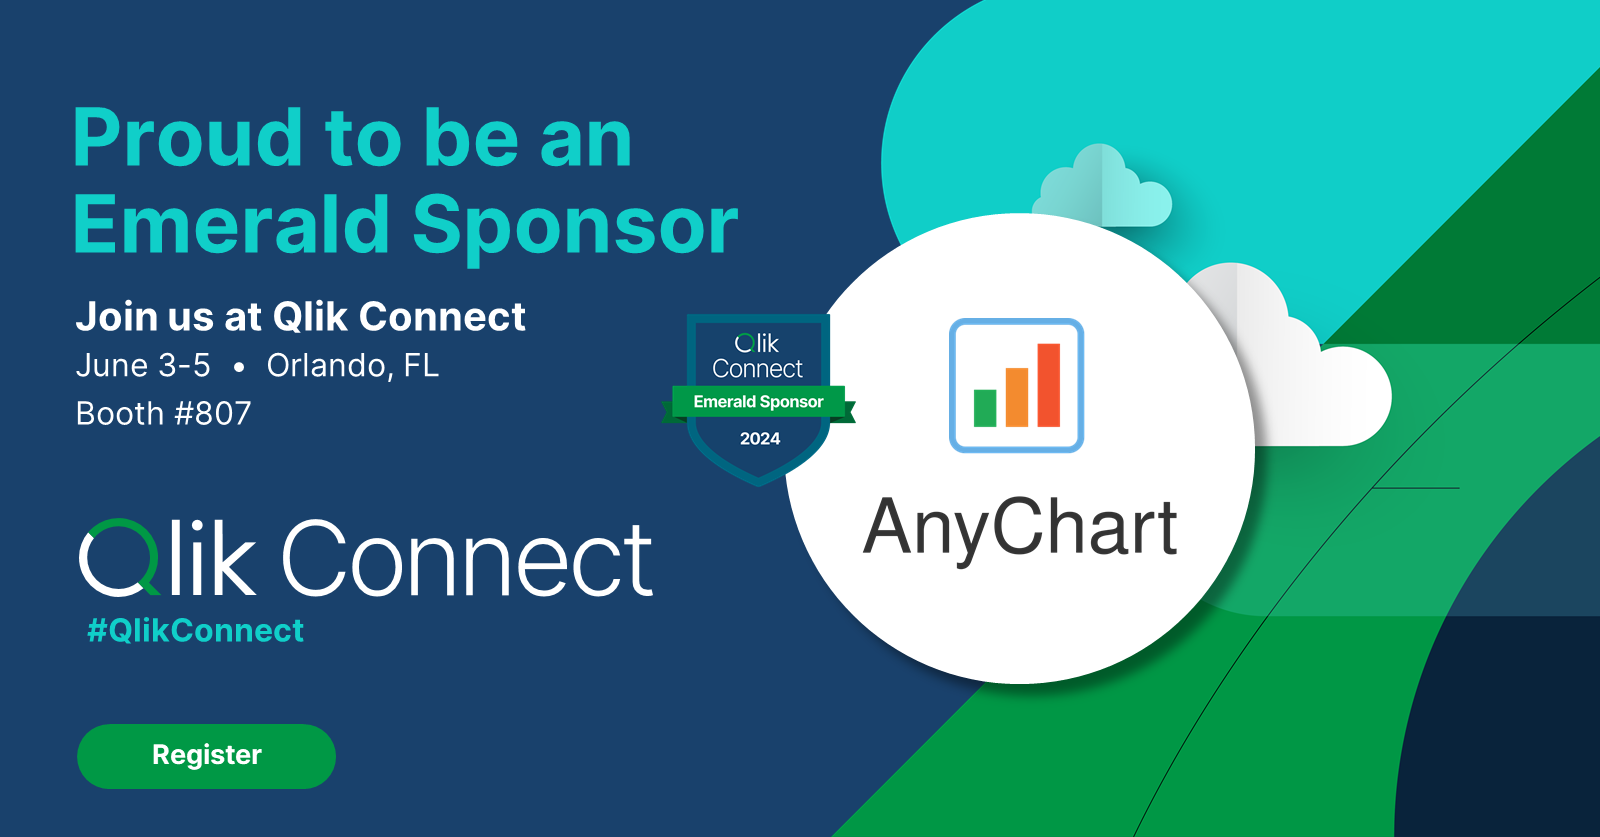 Let's Connect at Qlik Connect 2024: AnyChart Booth #807